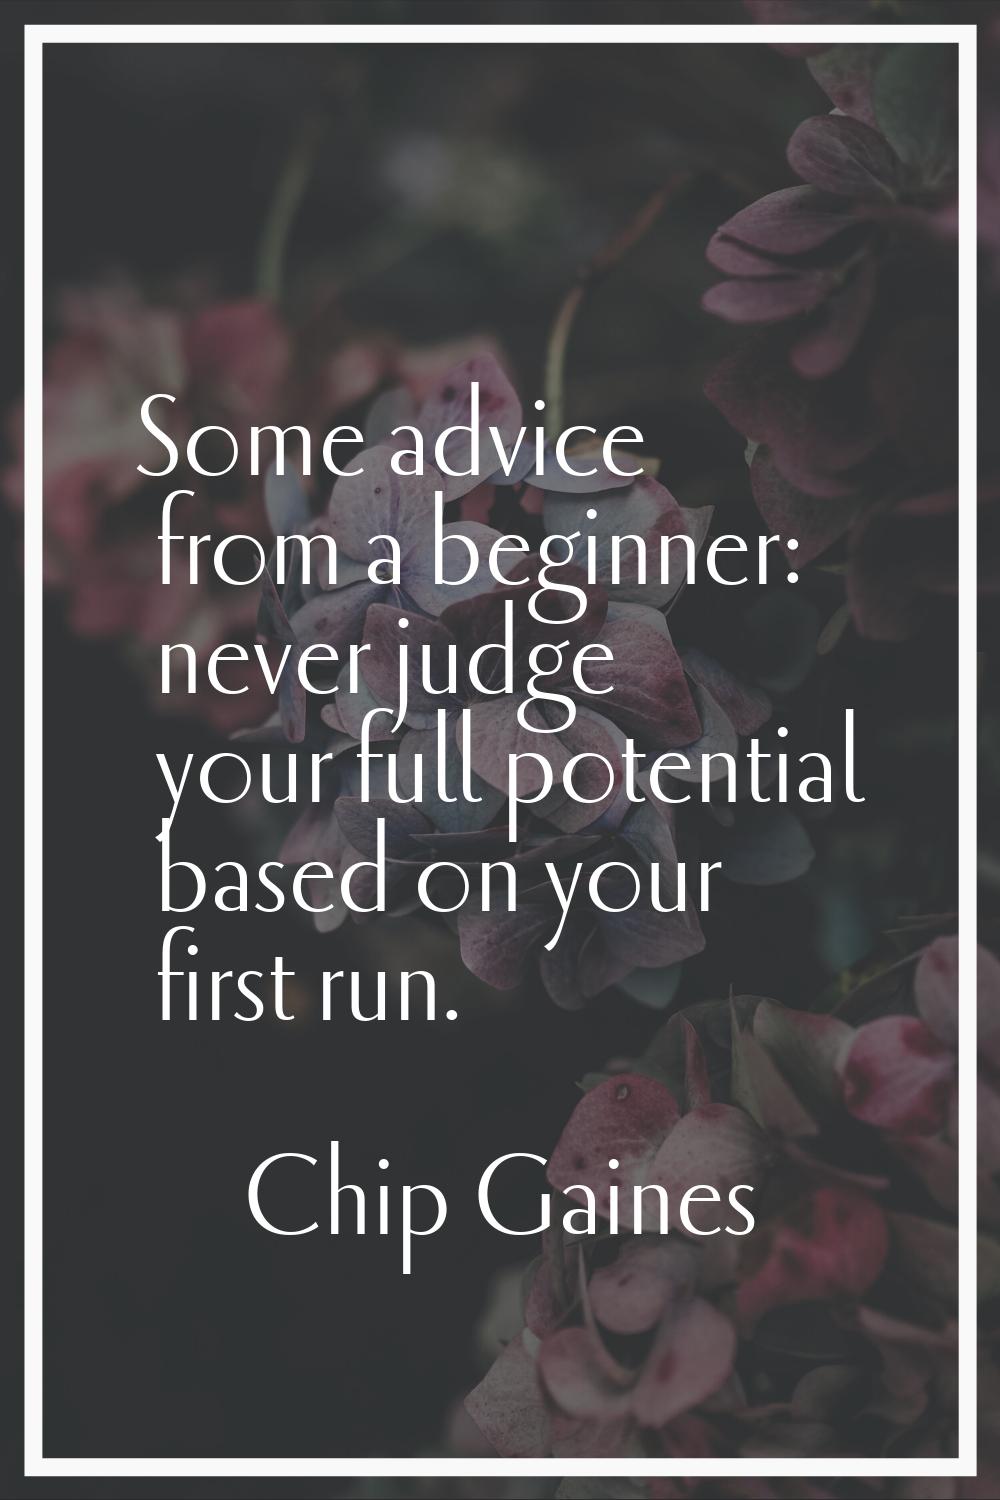 Some advice from a beginner: never judge your full potential based on your first run.